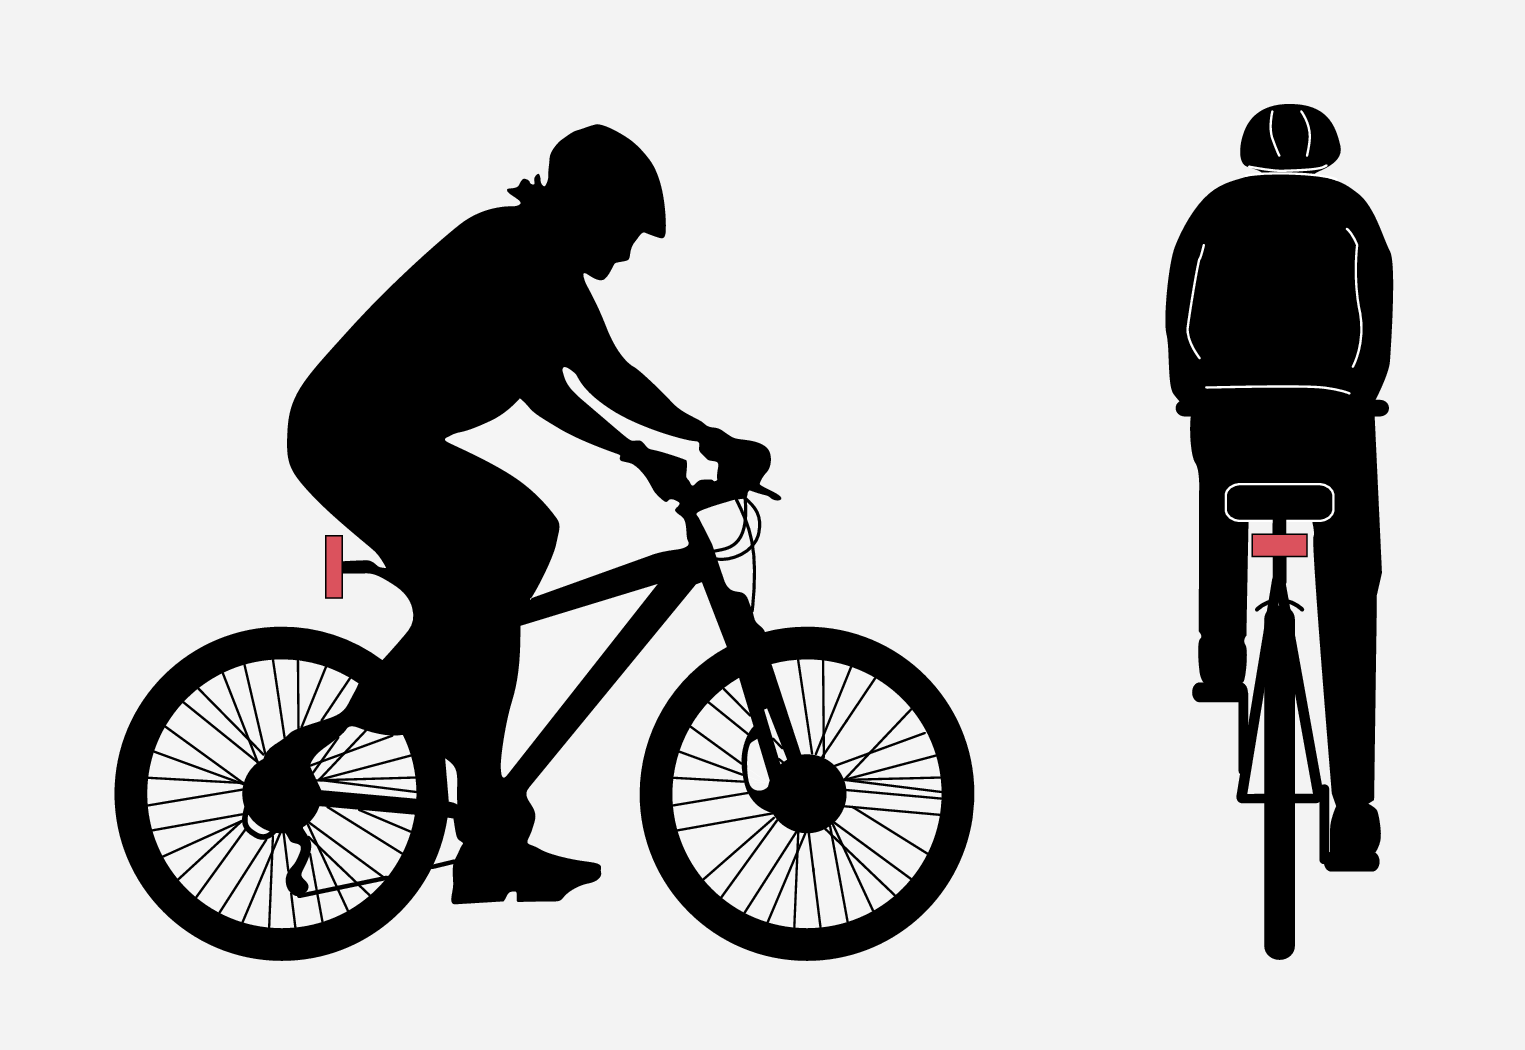 P5-1507-City Safety, detection of cyclists